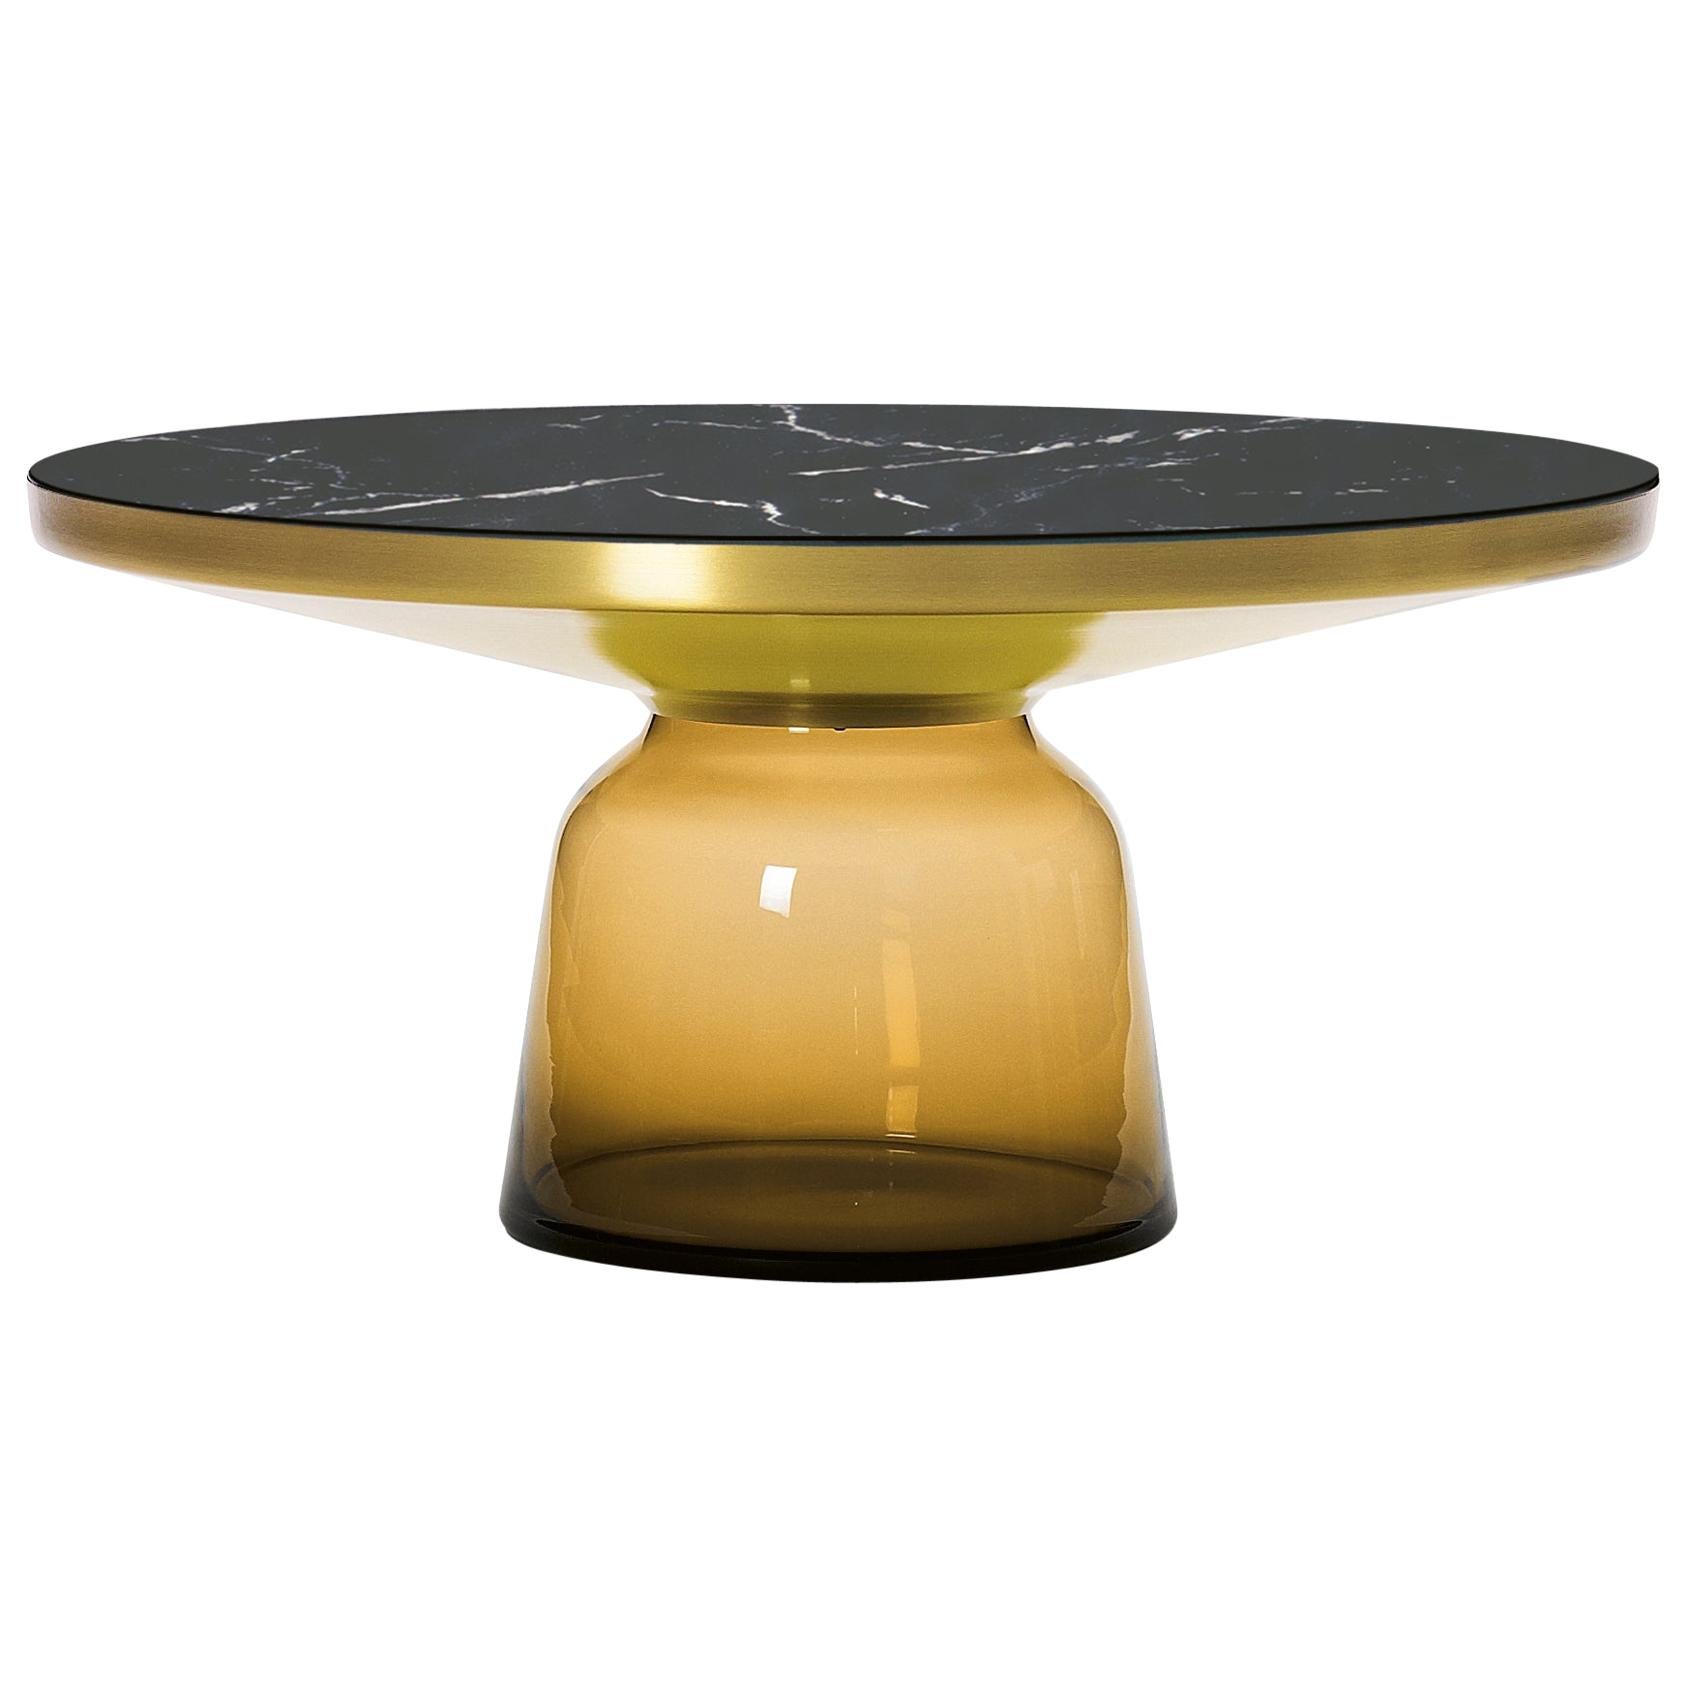 ClassiCon Bell Coffee Table in Amber Orange & Nero Marquina by Sebastian Herkner